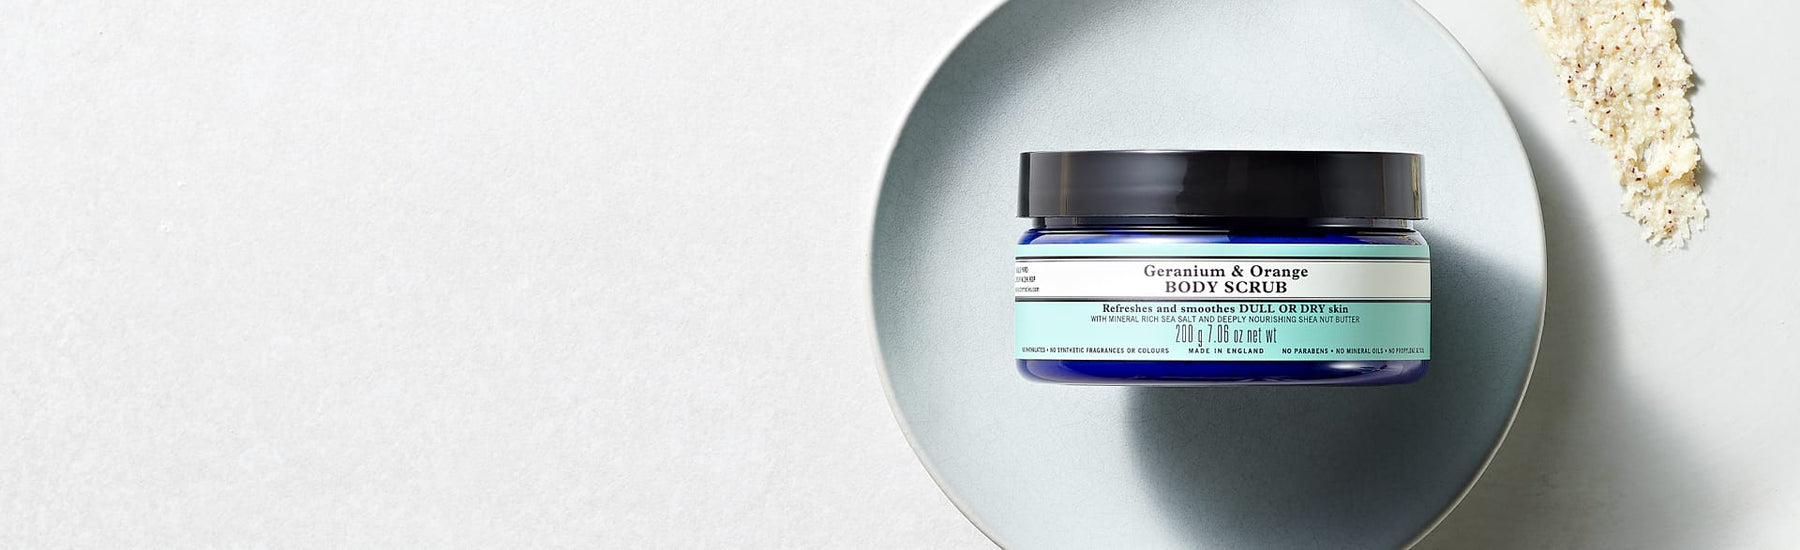 Picture of the Geranium & Orange Body Scrub by Neal's Yard Remedies